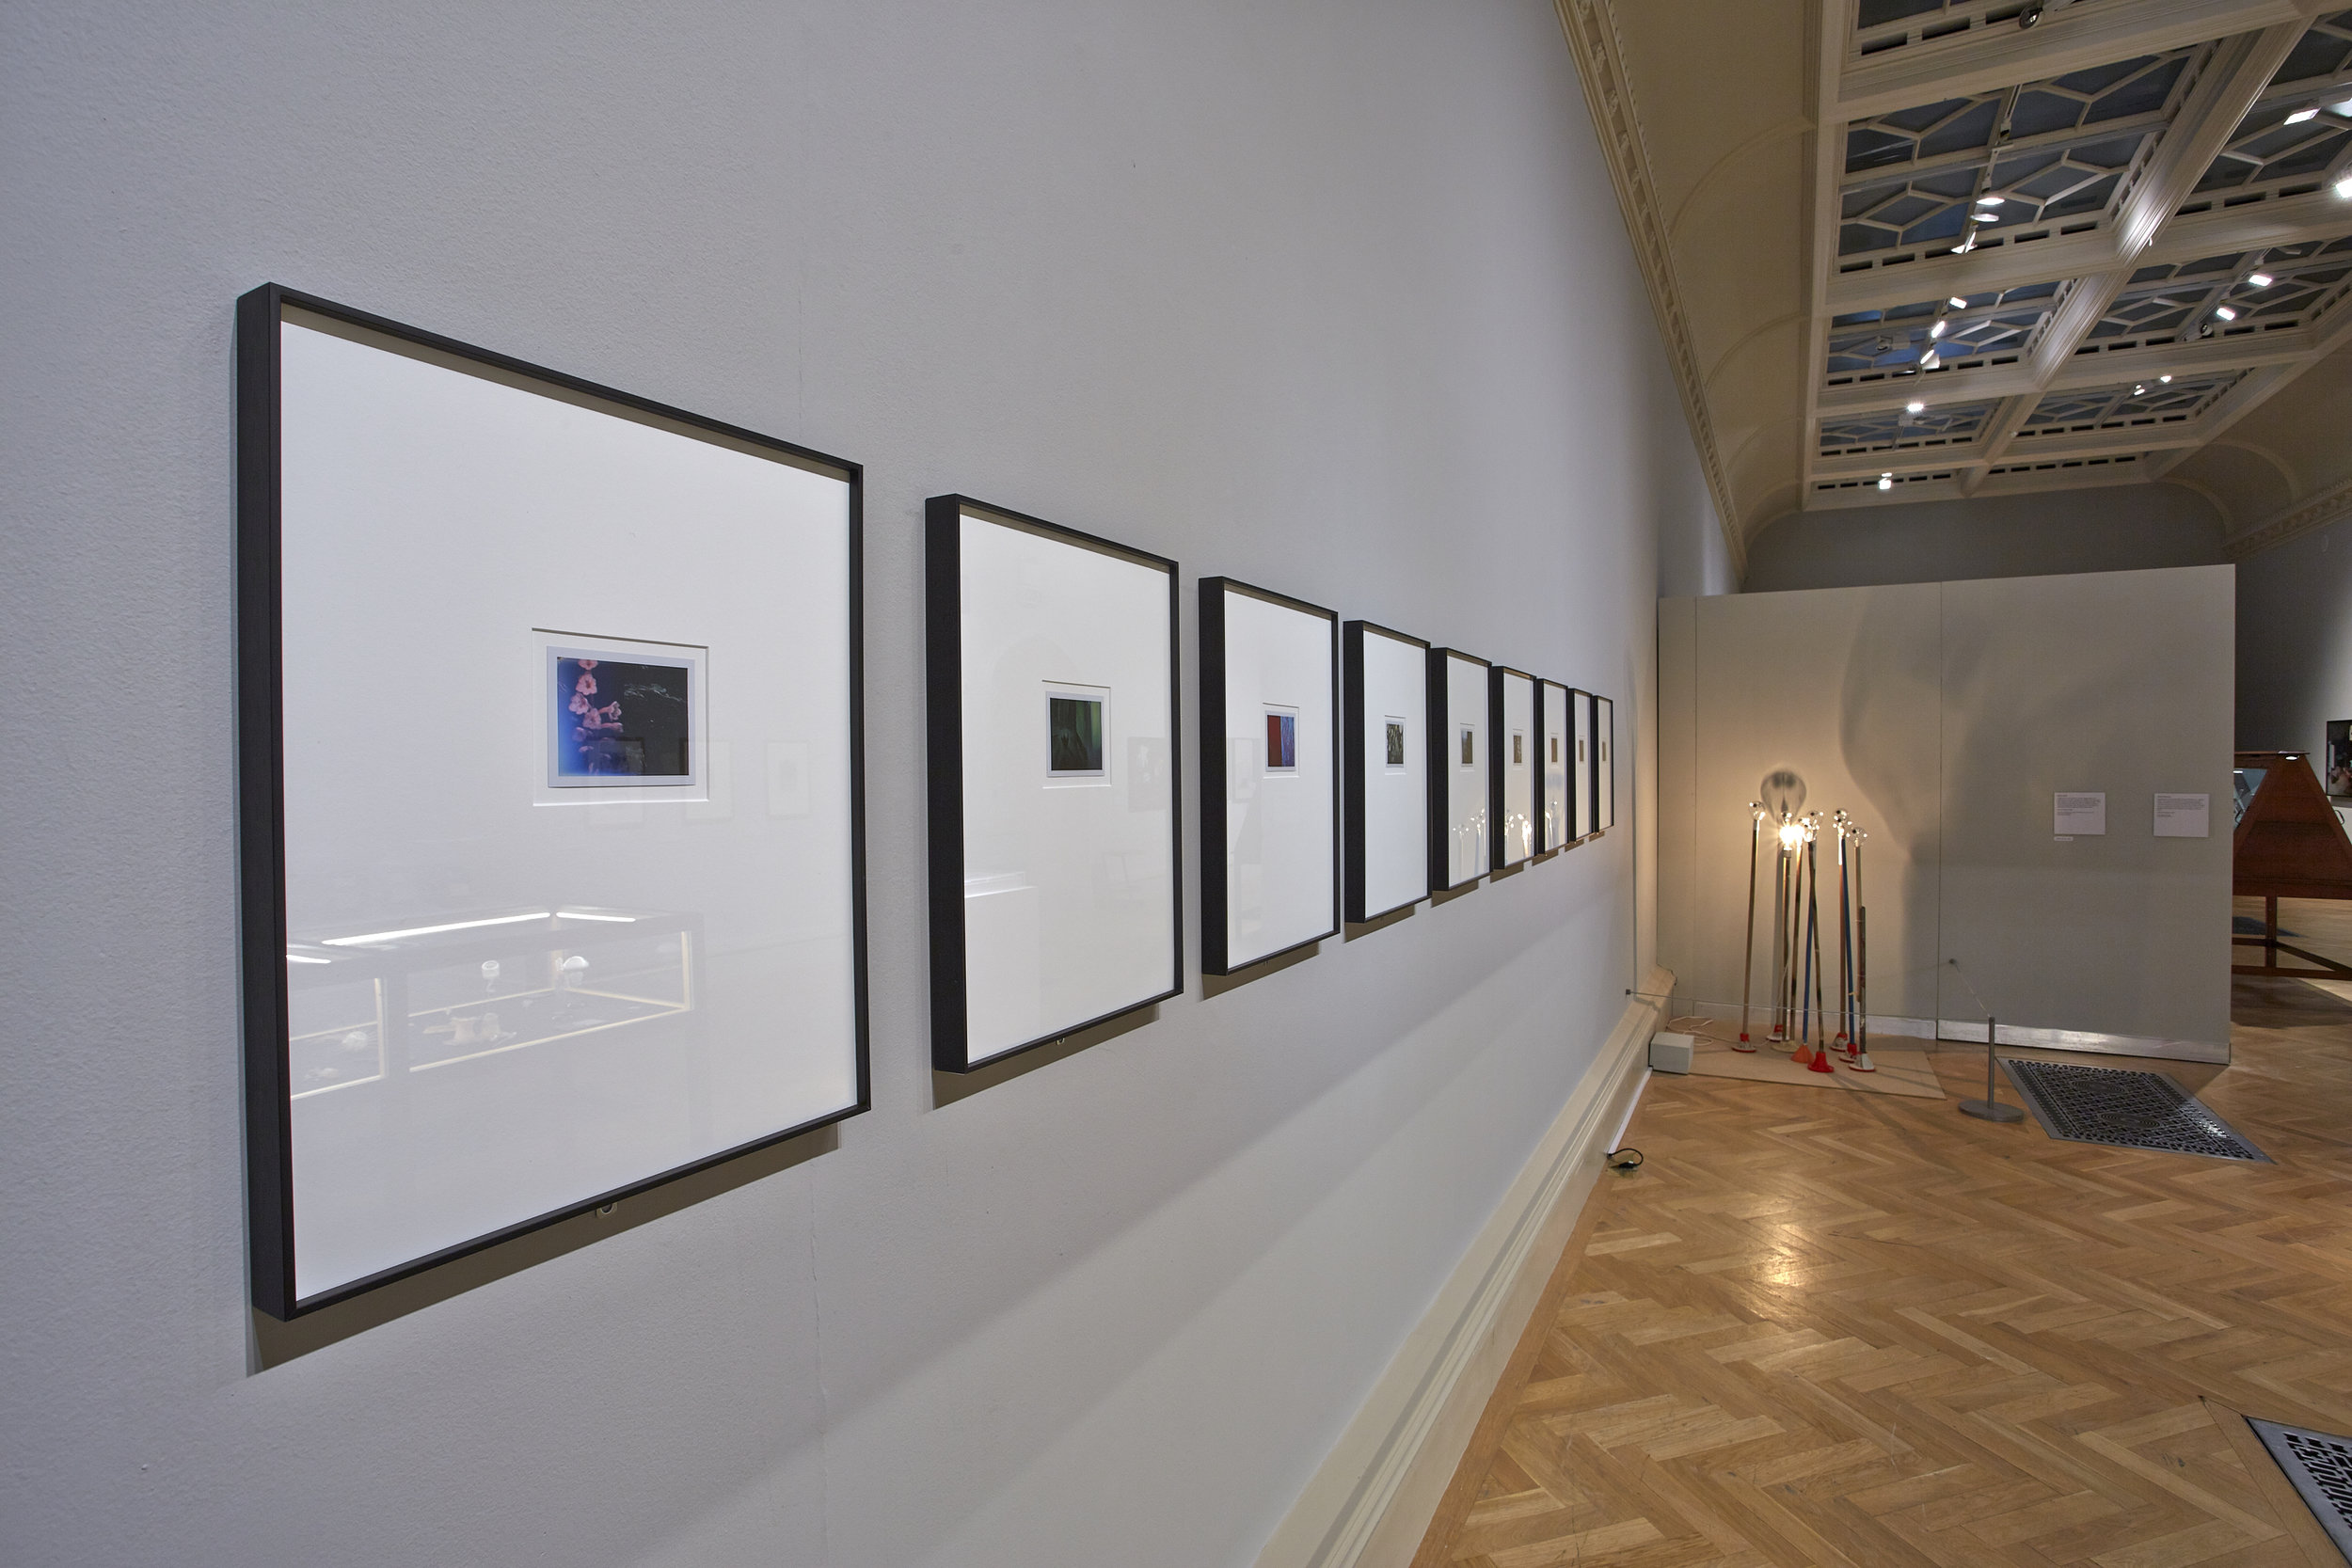  Installation view, Curiosity: Art and the Pleasures of Knowing, Turner Contemporary 23 May – 15 September 2013. Photo Steve White. Courtesy Hayward Touring 